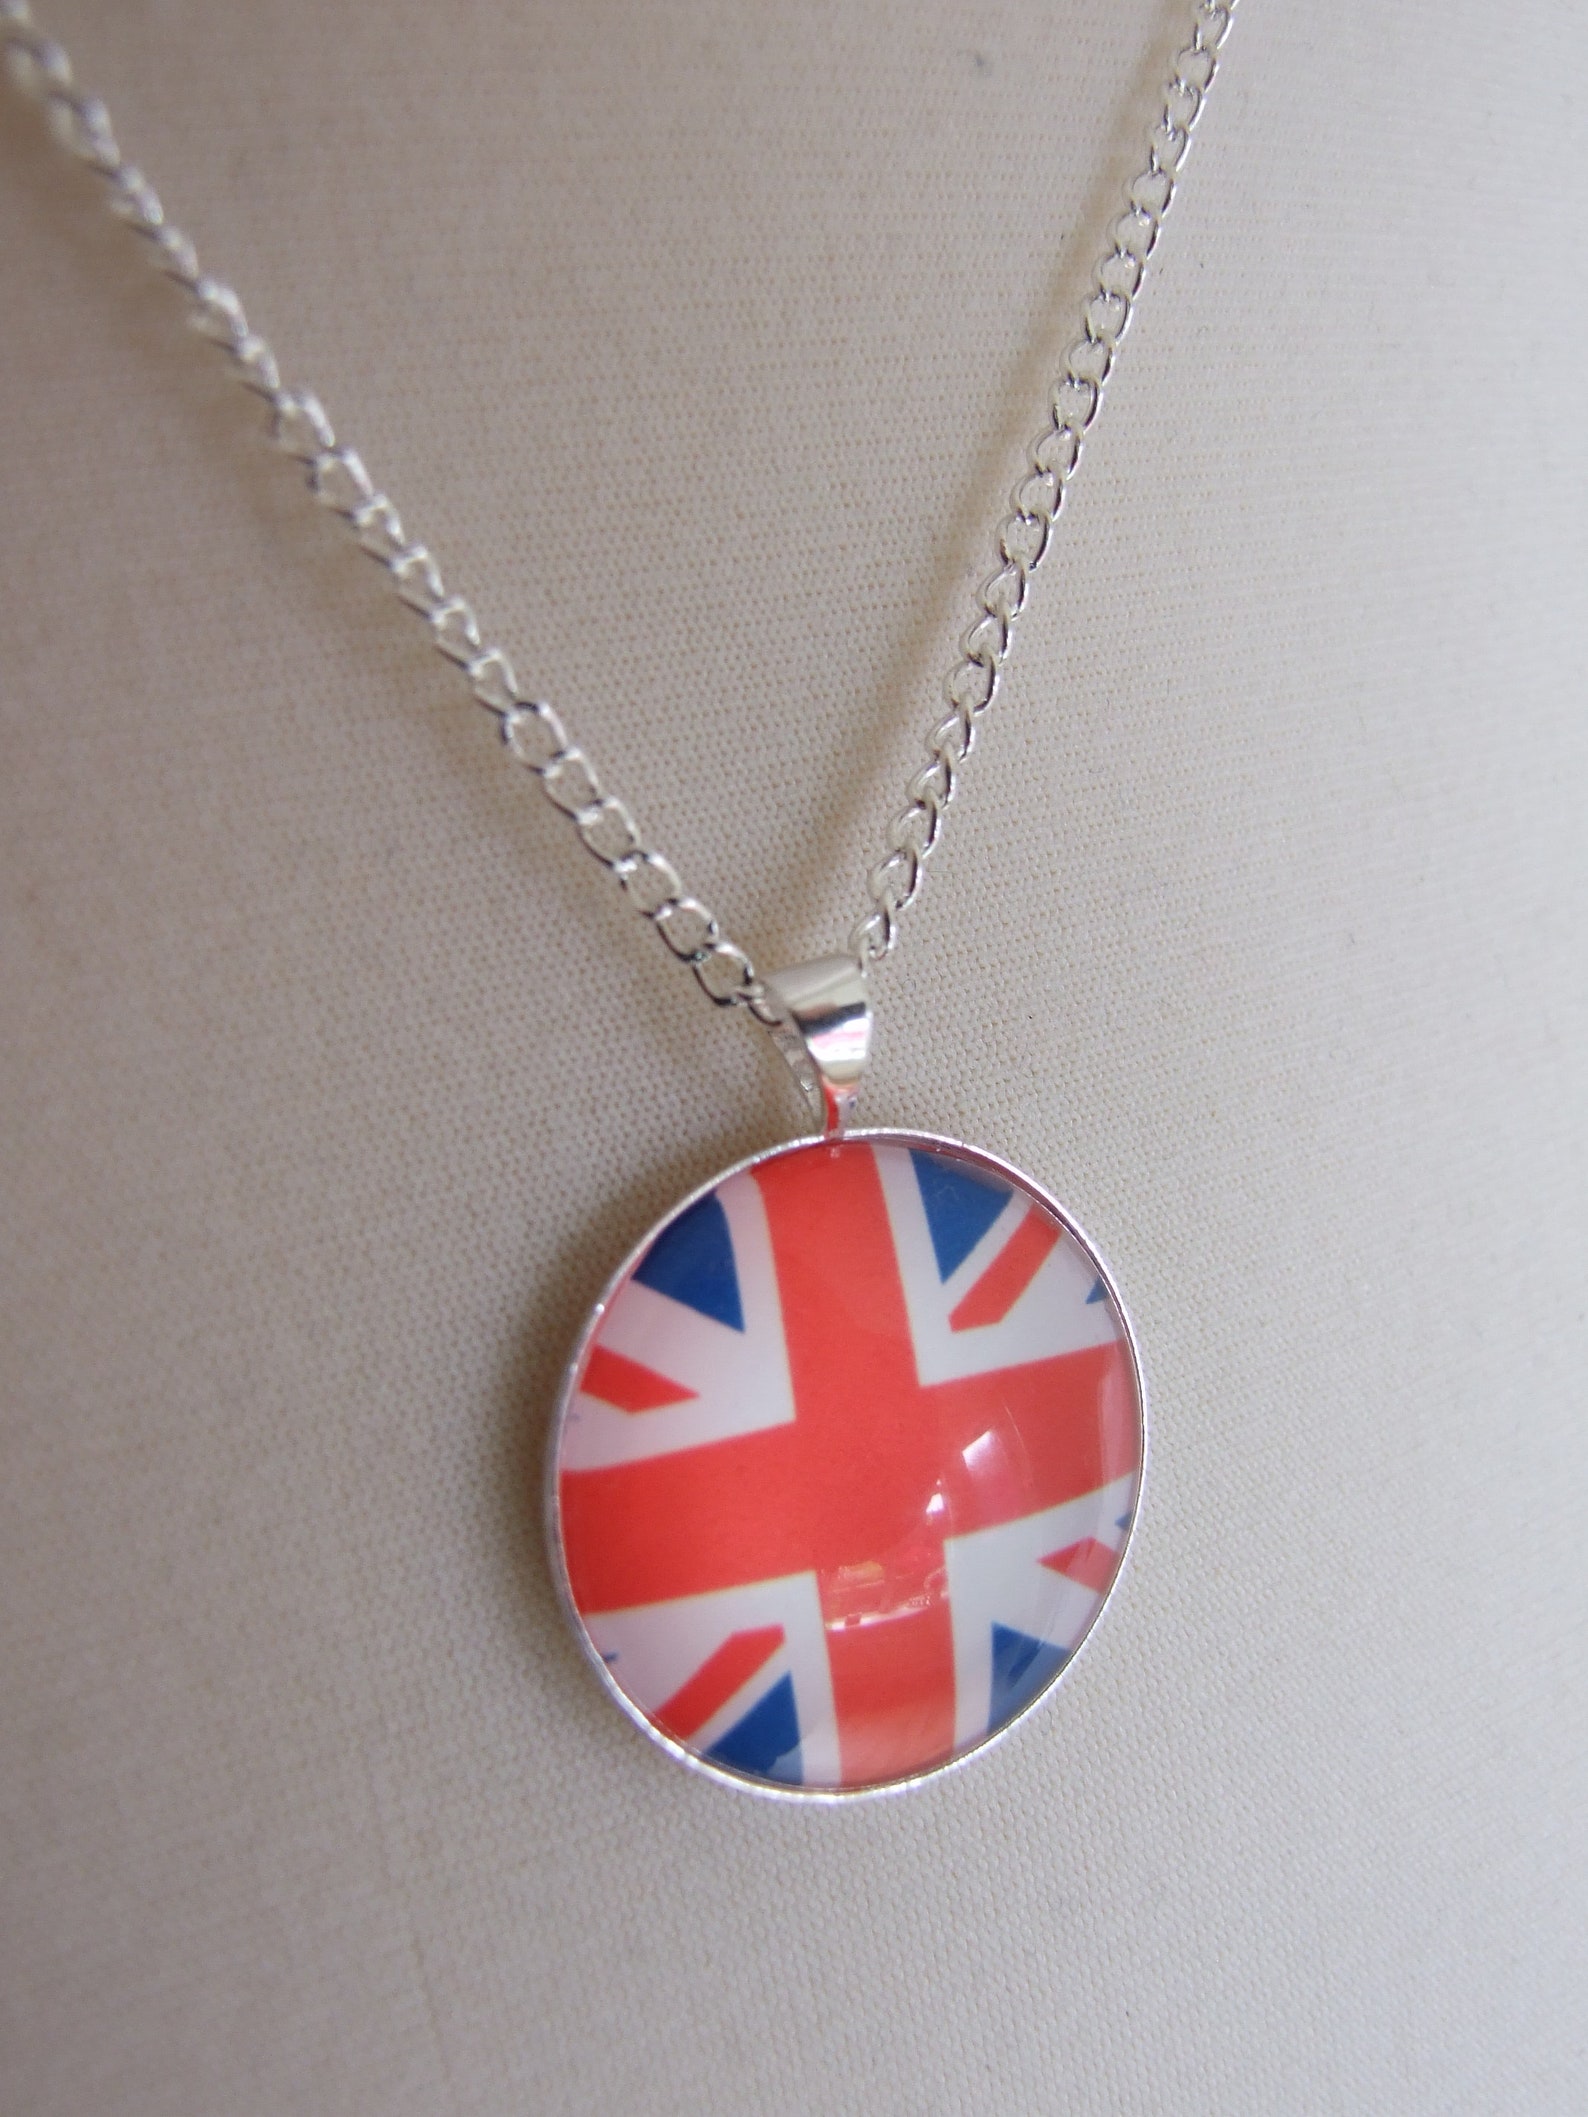 British Flag Pendant Necklace Bronze or Silver Chain and | Etsy